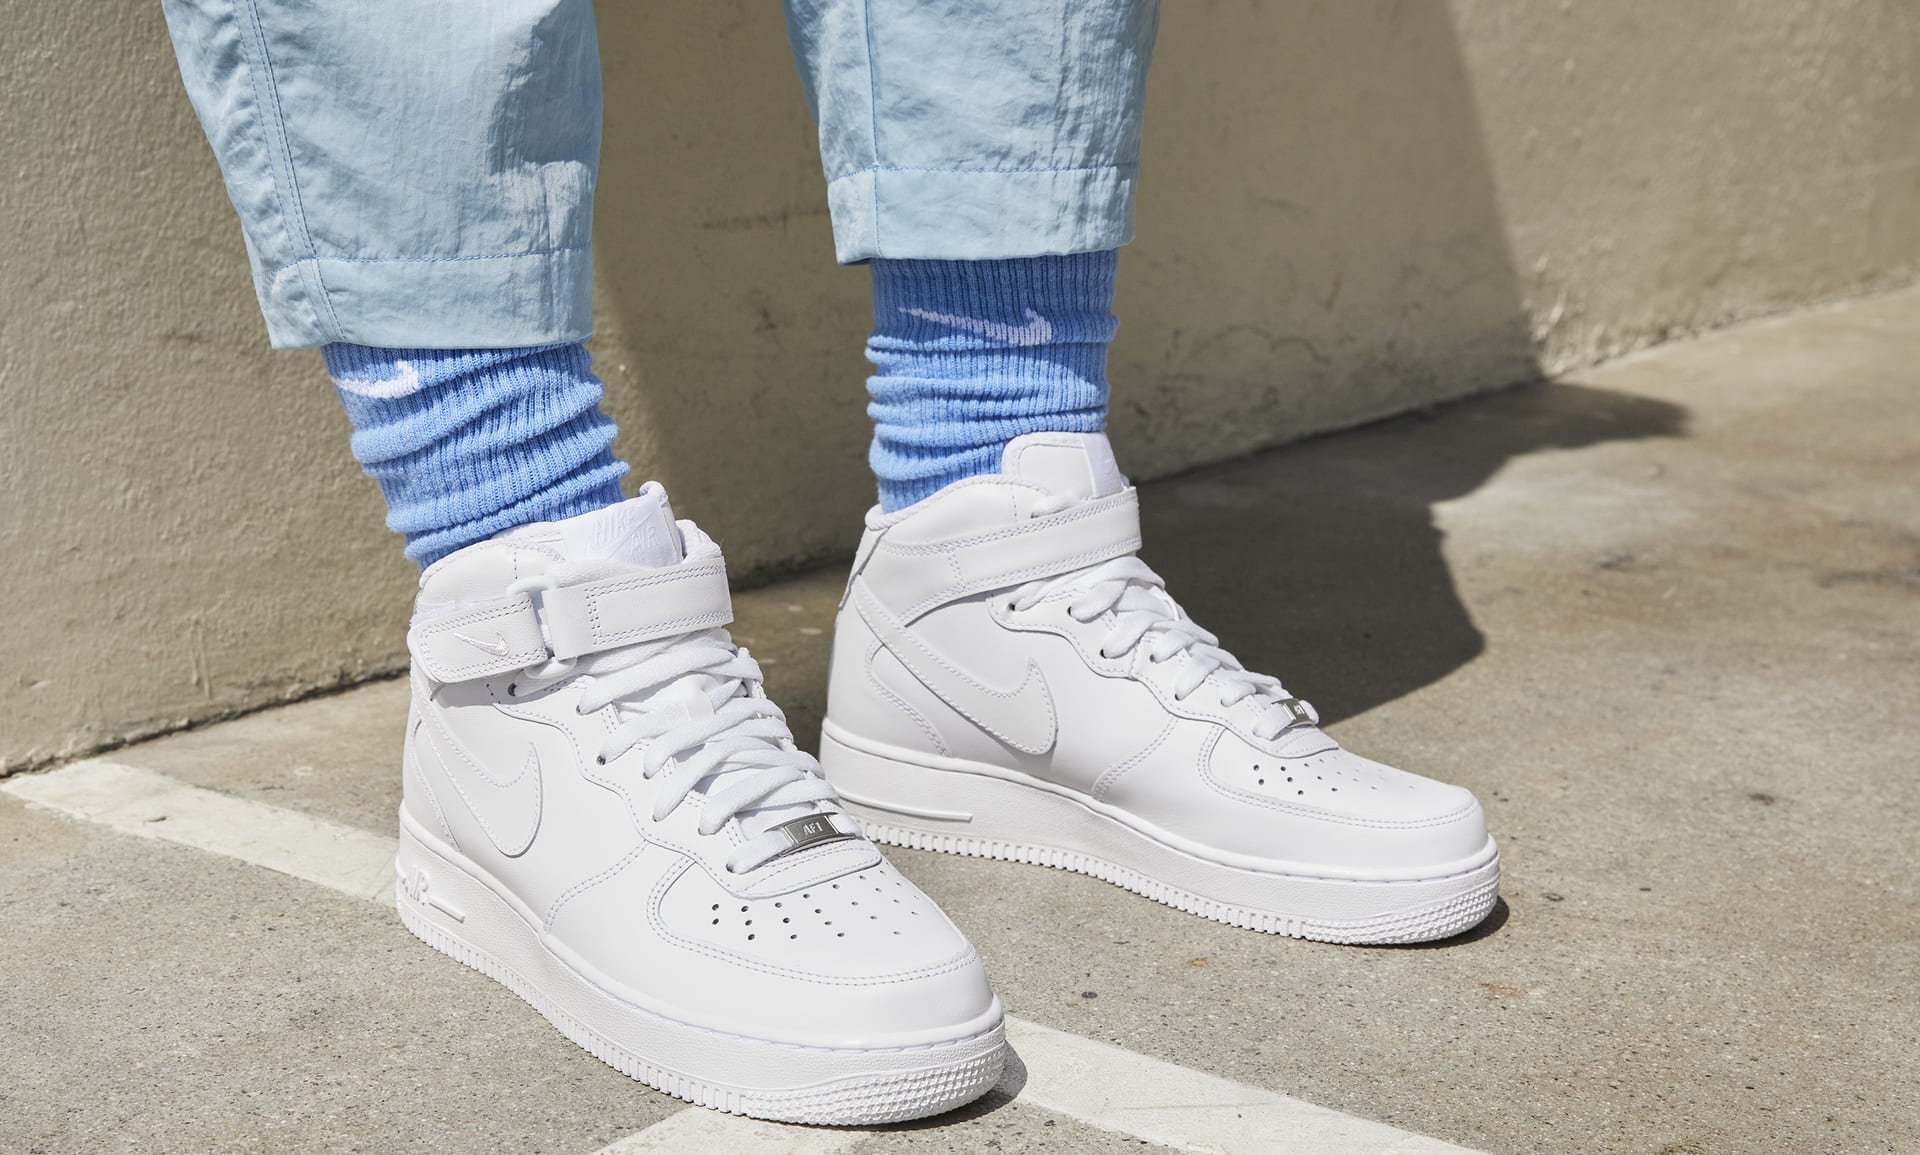 HOW TO STYLE NIKE AIR FORCE ONES with socks